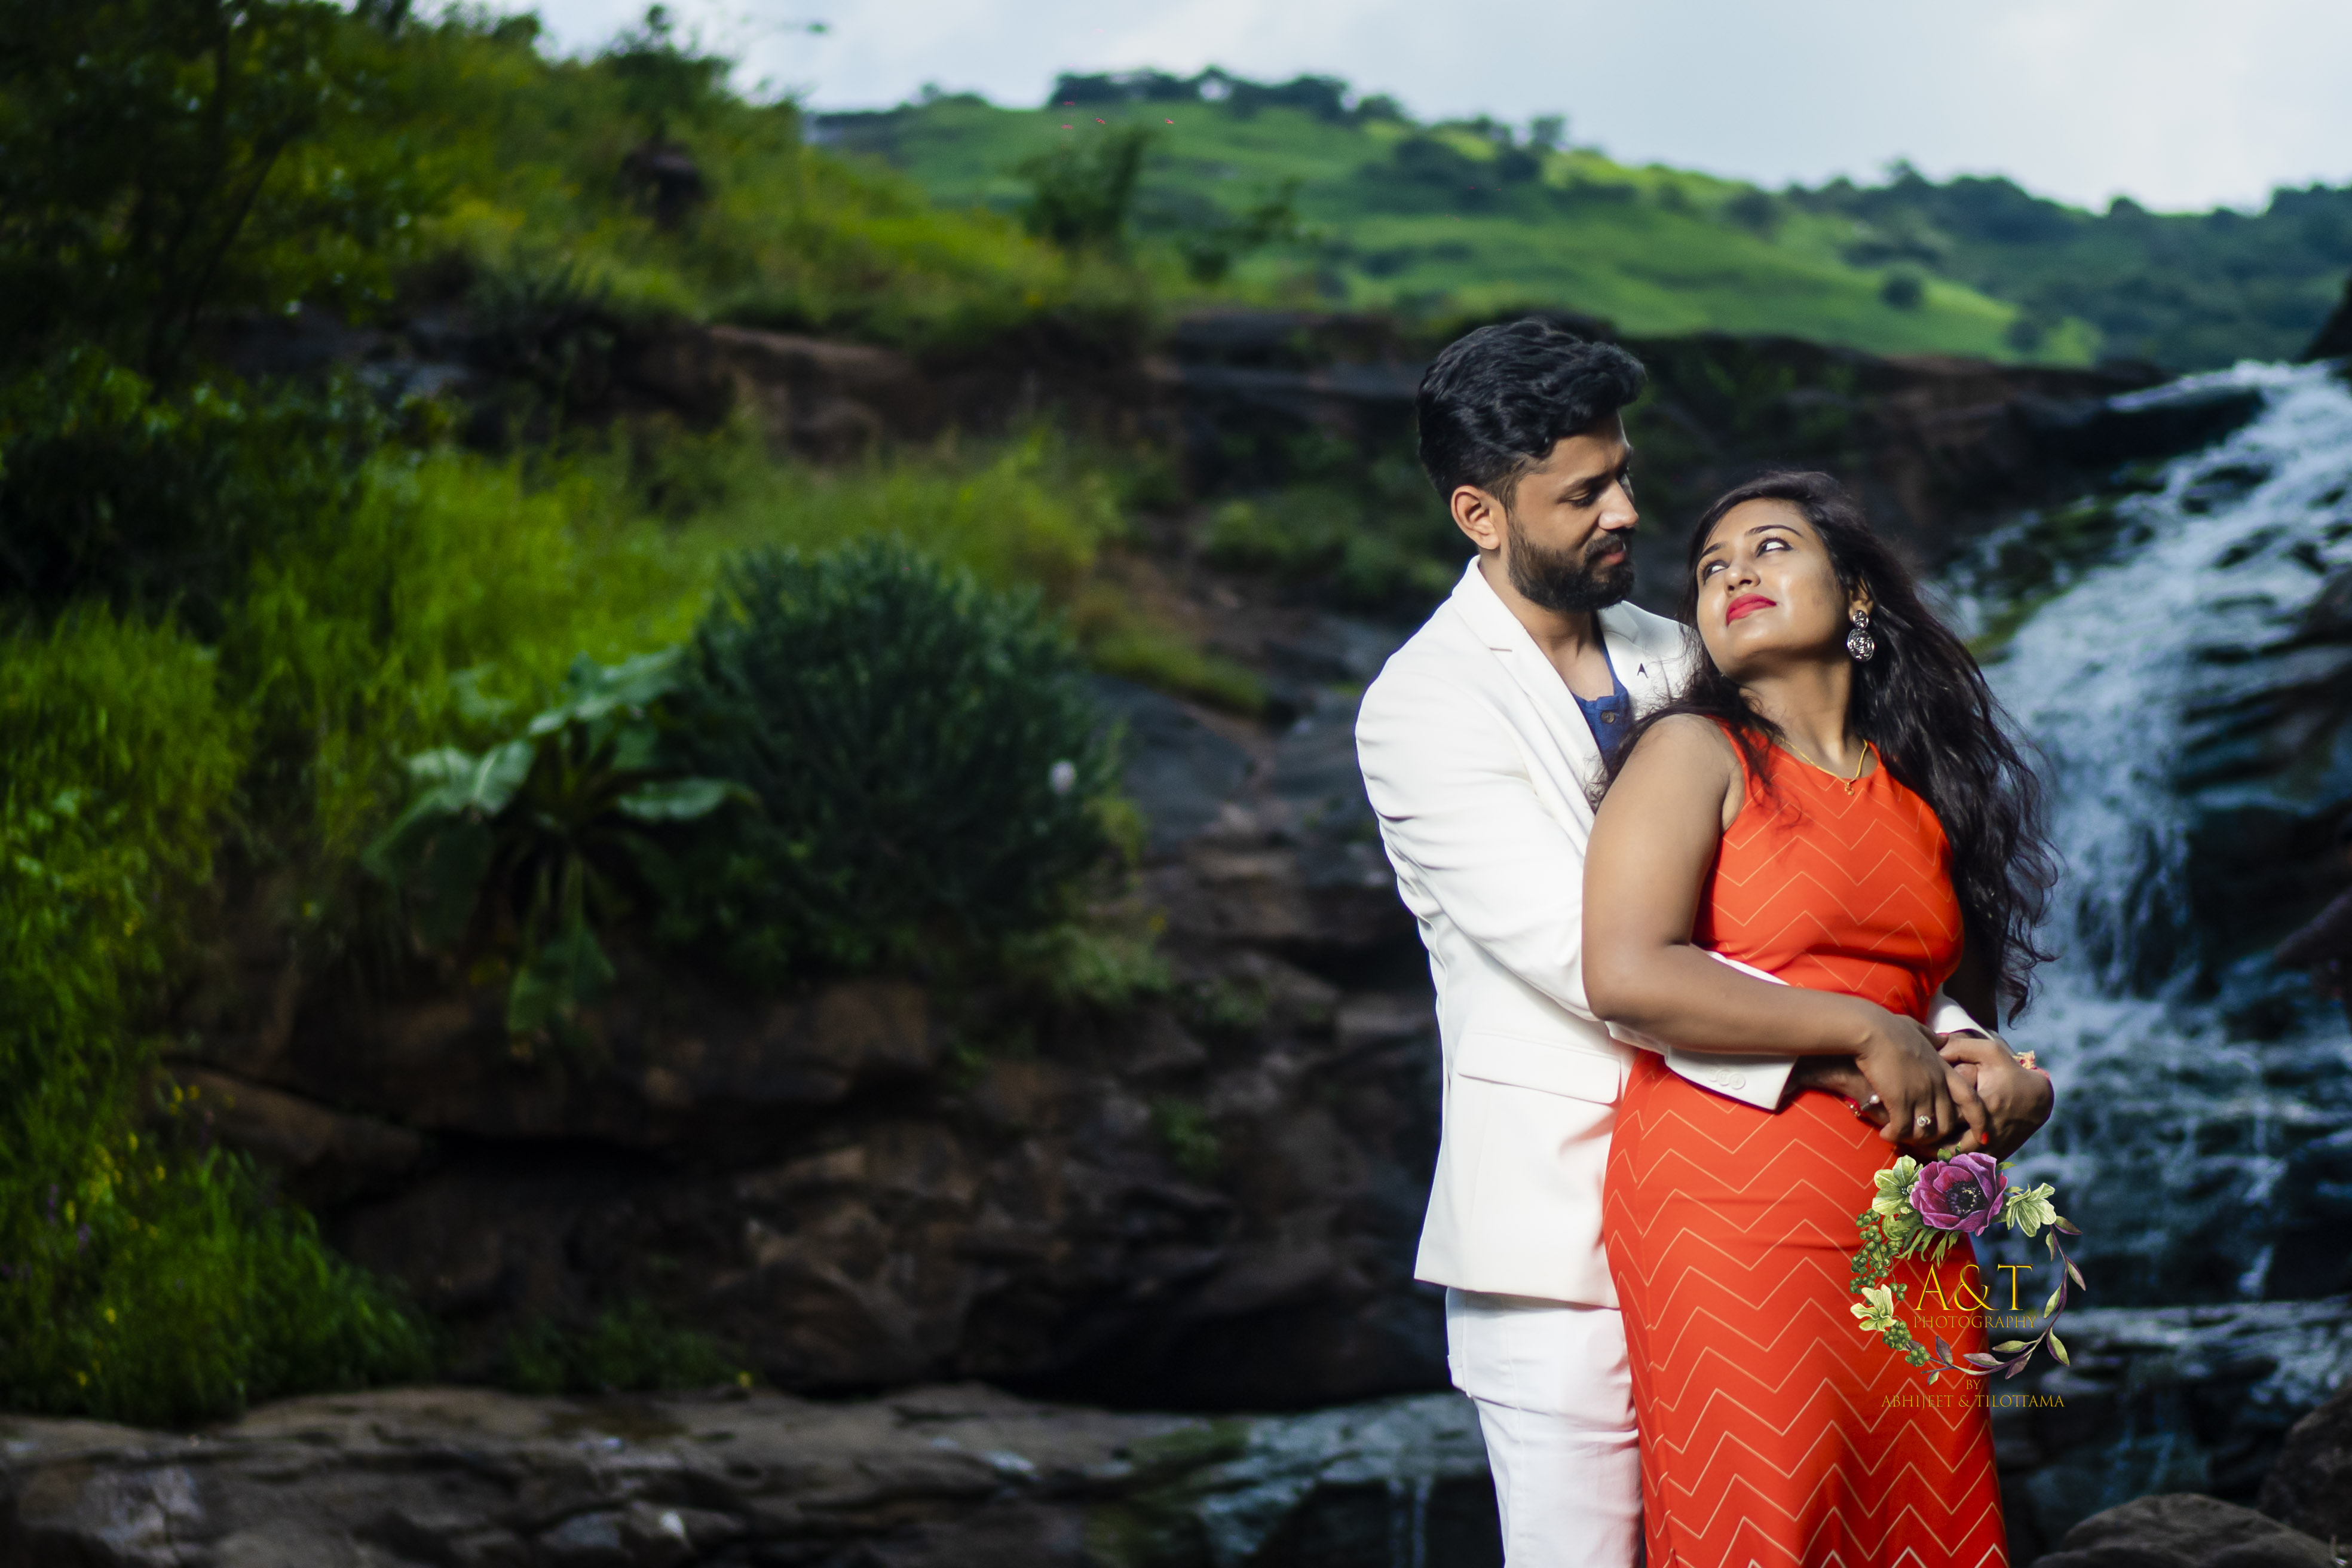 She was feeling the virtual ecstasy in the arm of her loved ones at their Pre-Wedding Photoshoot in Lonawala.